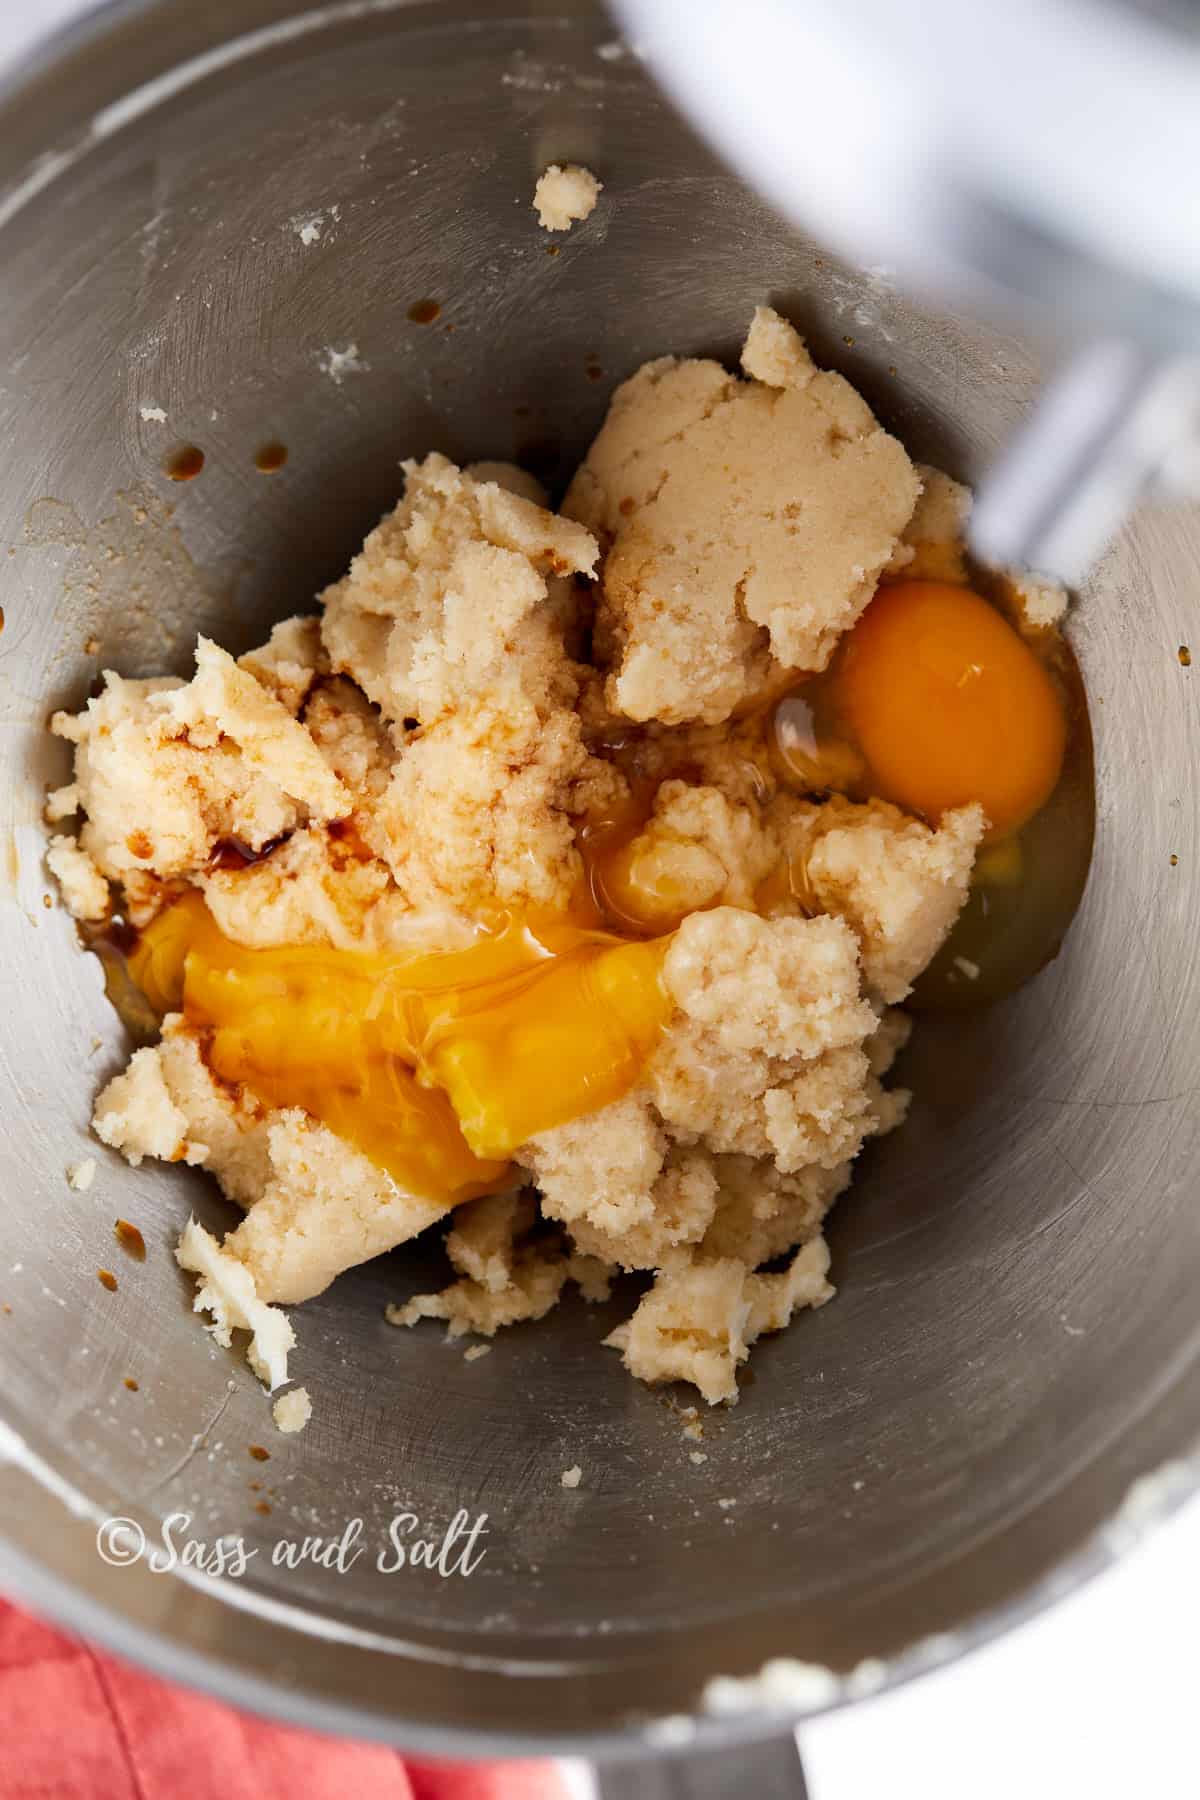 The image shows a close-up view of a mixing bowl where creamed butter and sugar mixture has been combined with eggs. Two whole eggs rest on top of the mixture, with the vibrant orange yolks standing out against the pale background of the dough. The process of adding wet ingredients to the creamed mixture is a crucial step in cookie-making, and the image captures this moment just before the eggs are mixed in.